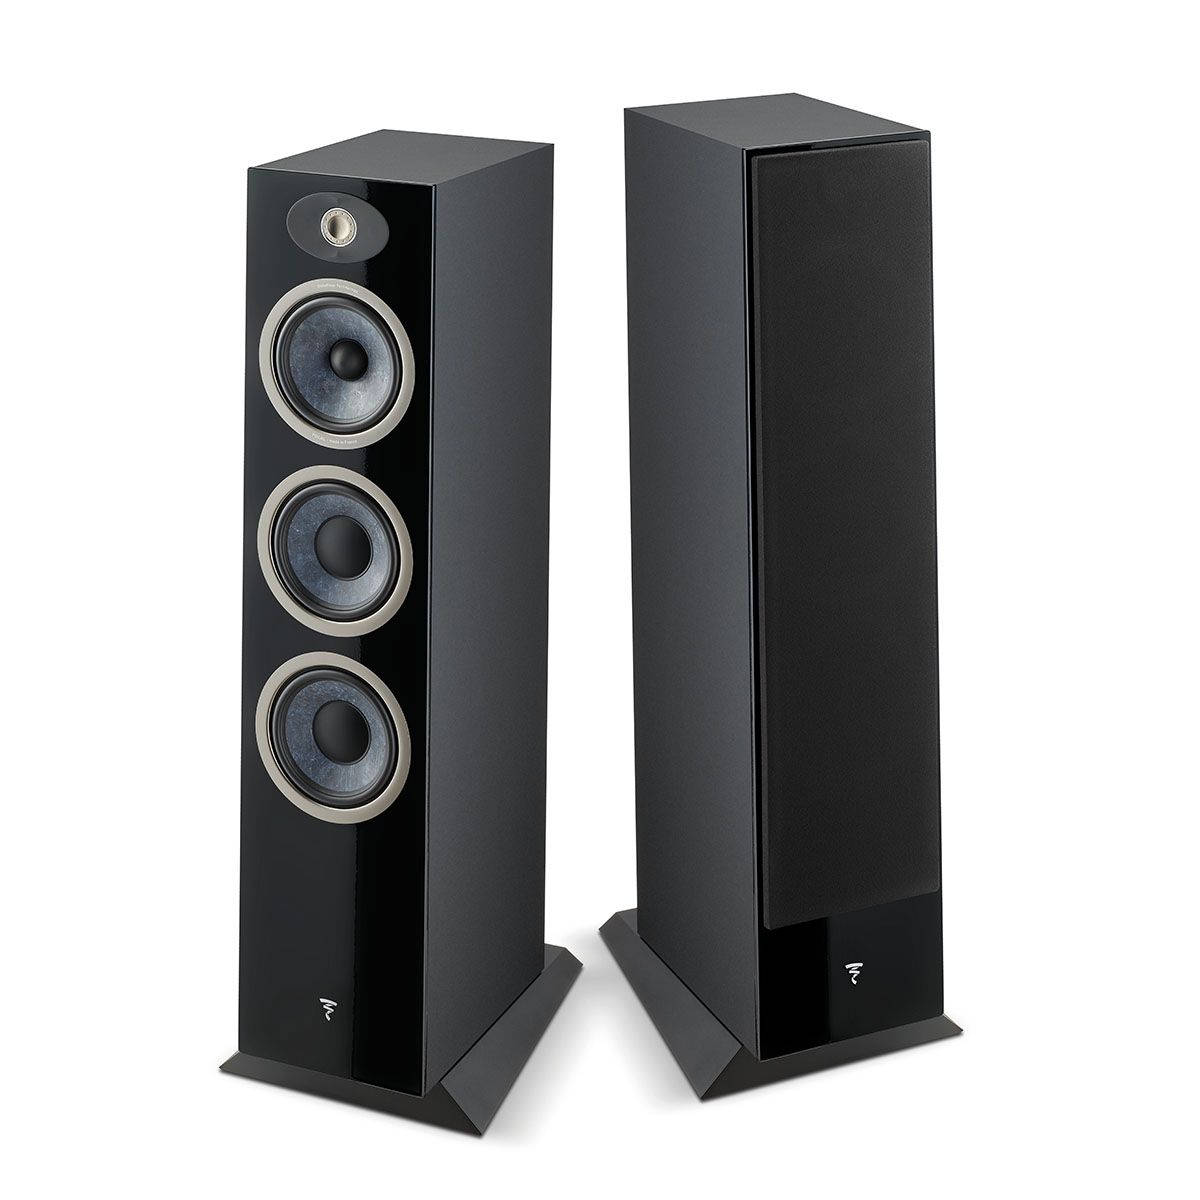 Focal Theva No3 Floorstanding Speaker - Black - Each - view of pair, one with grille, one without grille